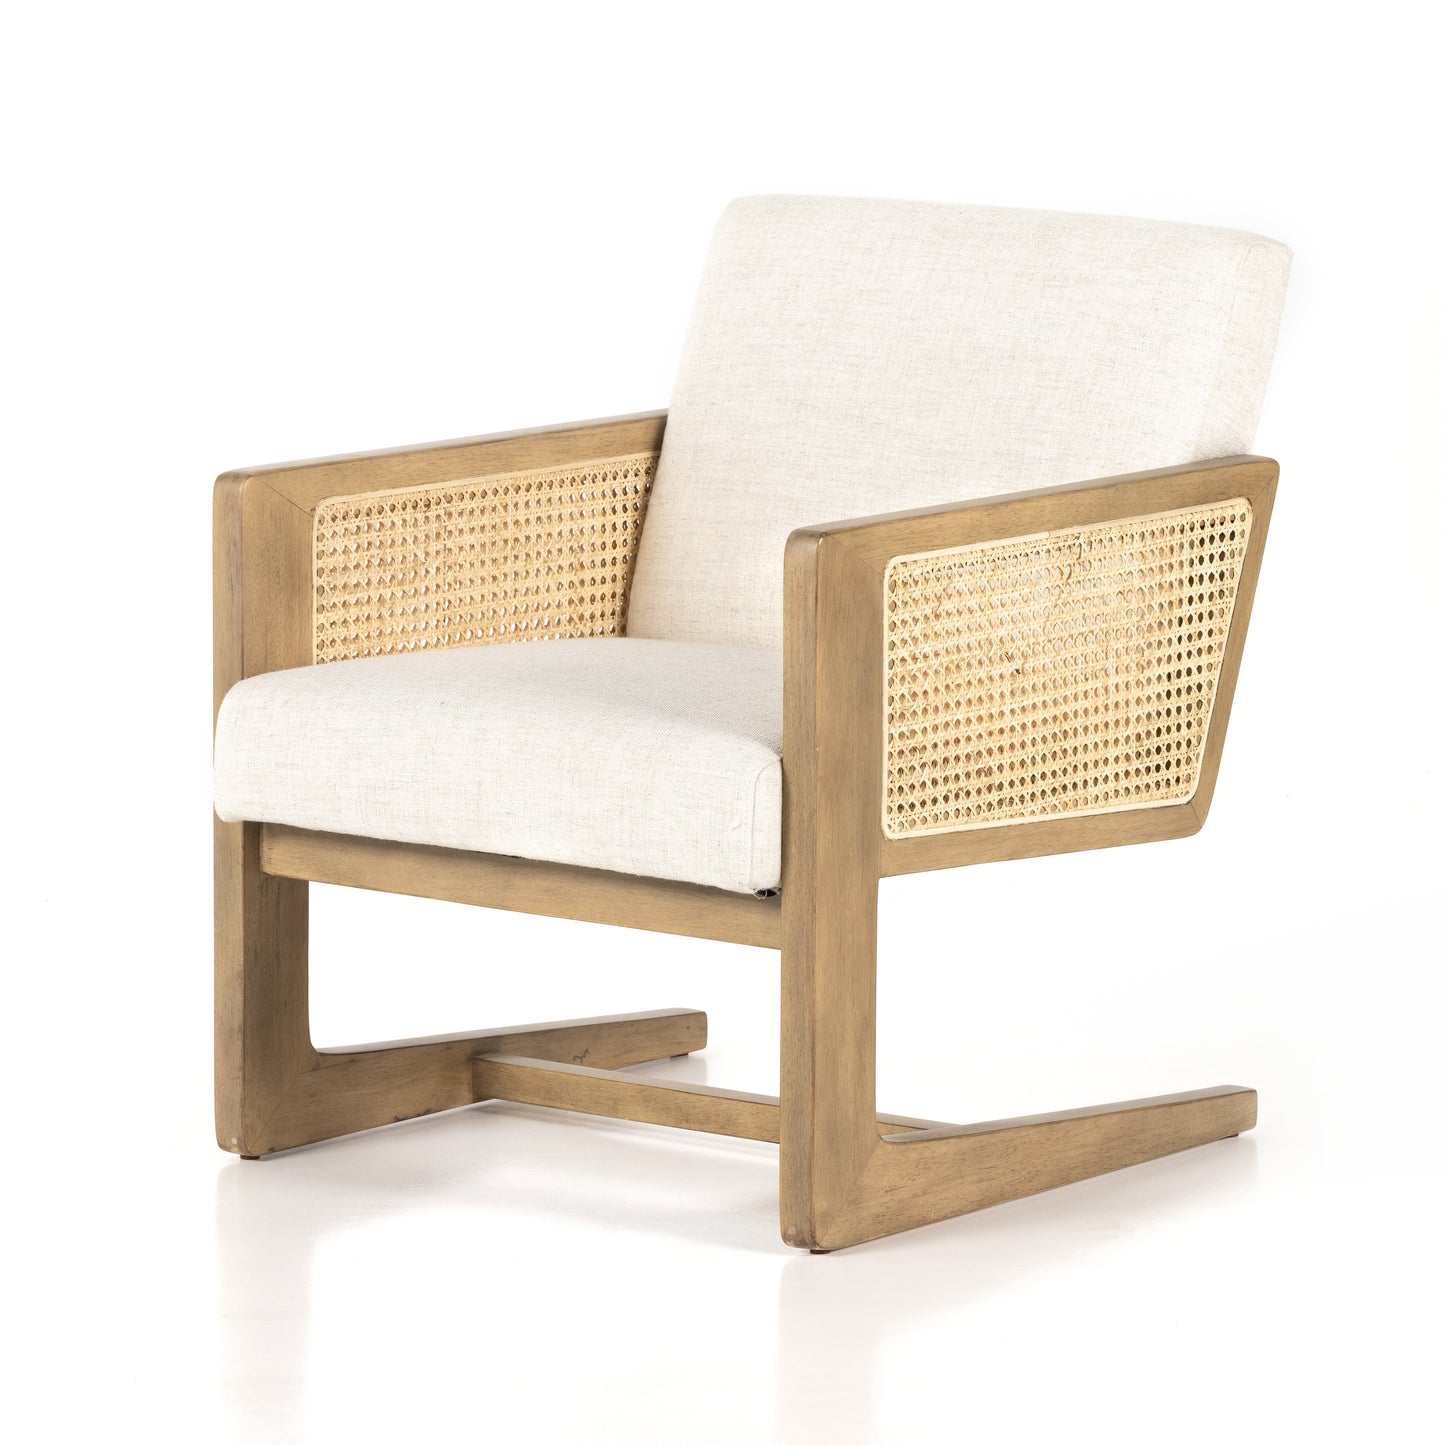 Adney Chair-Alcala Cream Lounge Chairs Four Hands     Four Hands, Burke Decor, Mid Century Modern Furniture, Old Bones Furniture Company, Old Bones Co, Modern Mid Century, Designer Furniture, https://www.oldbonesco.com/